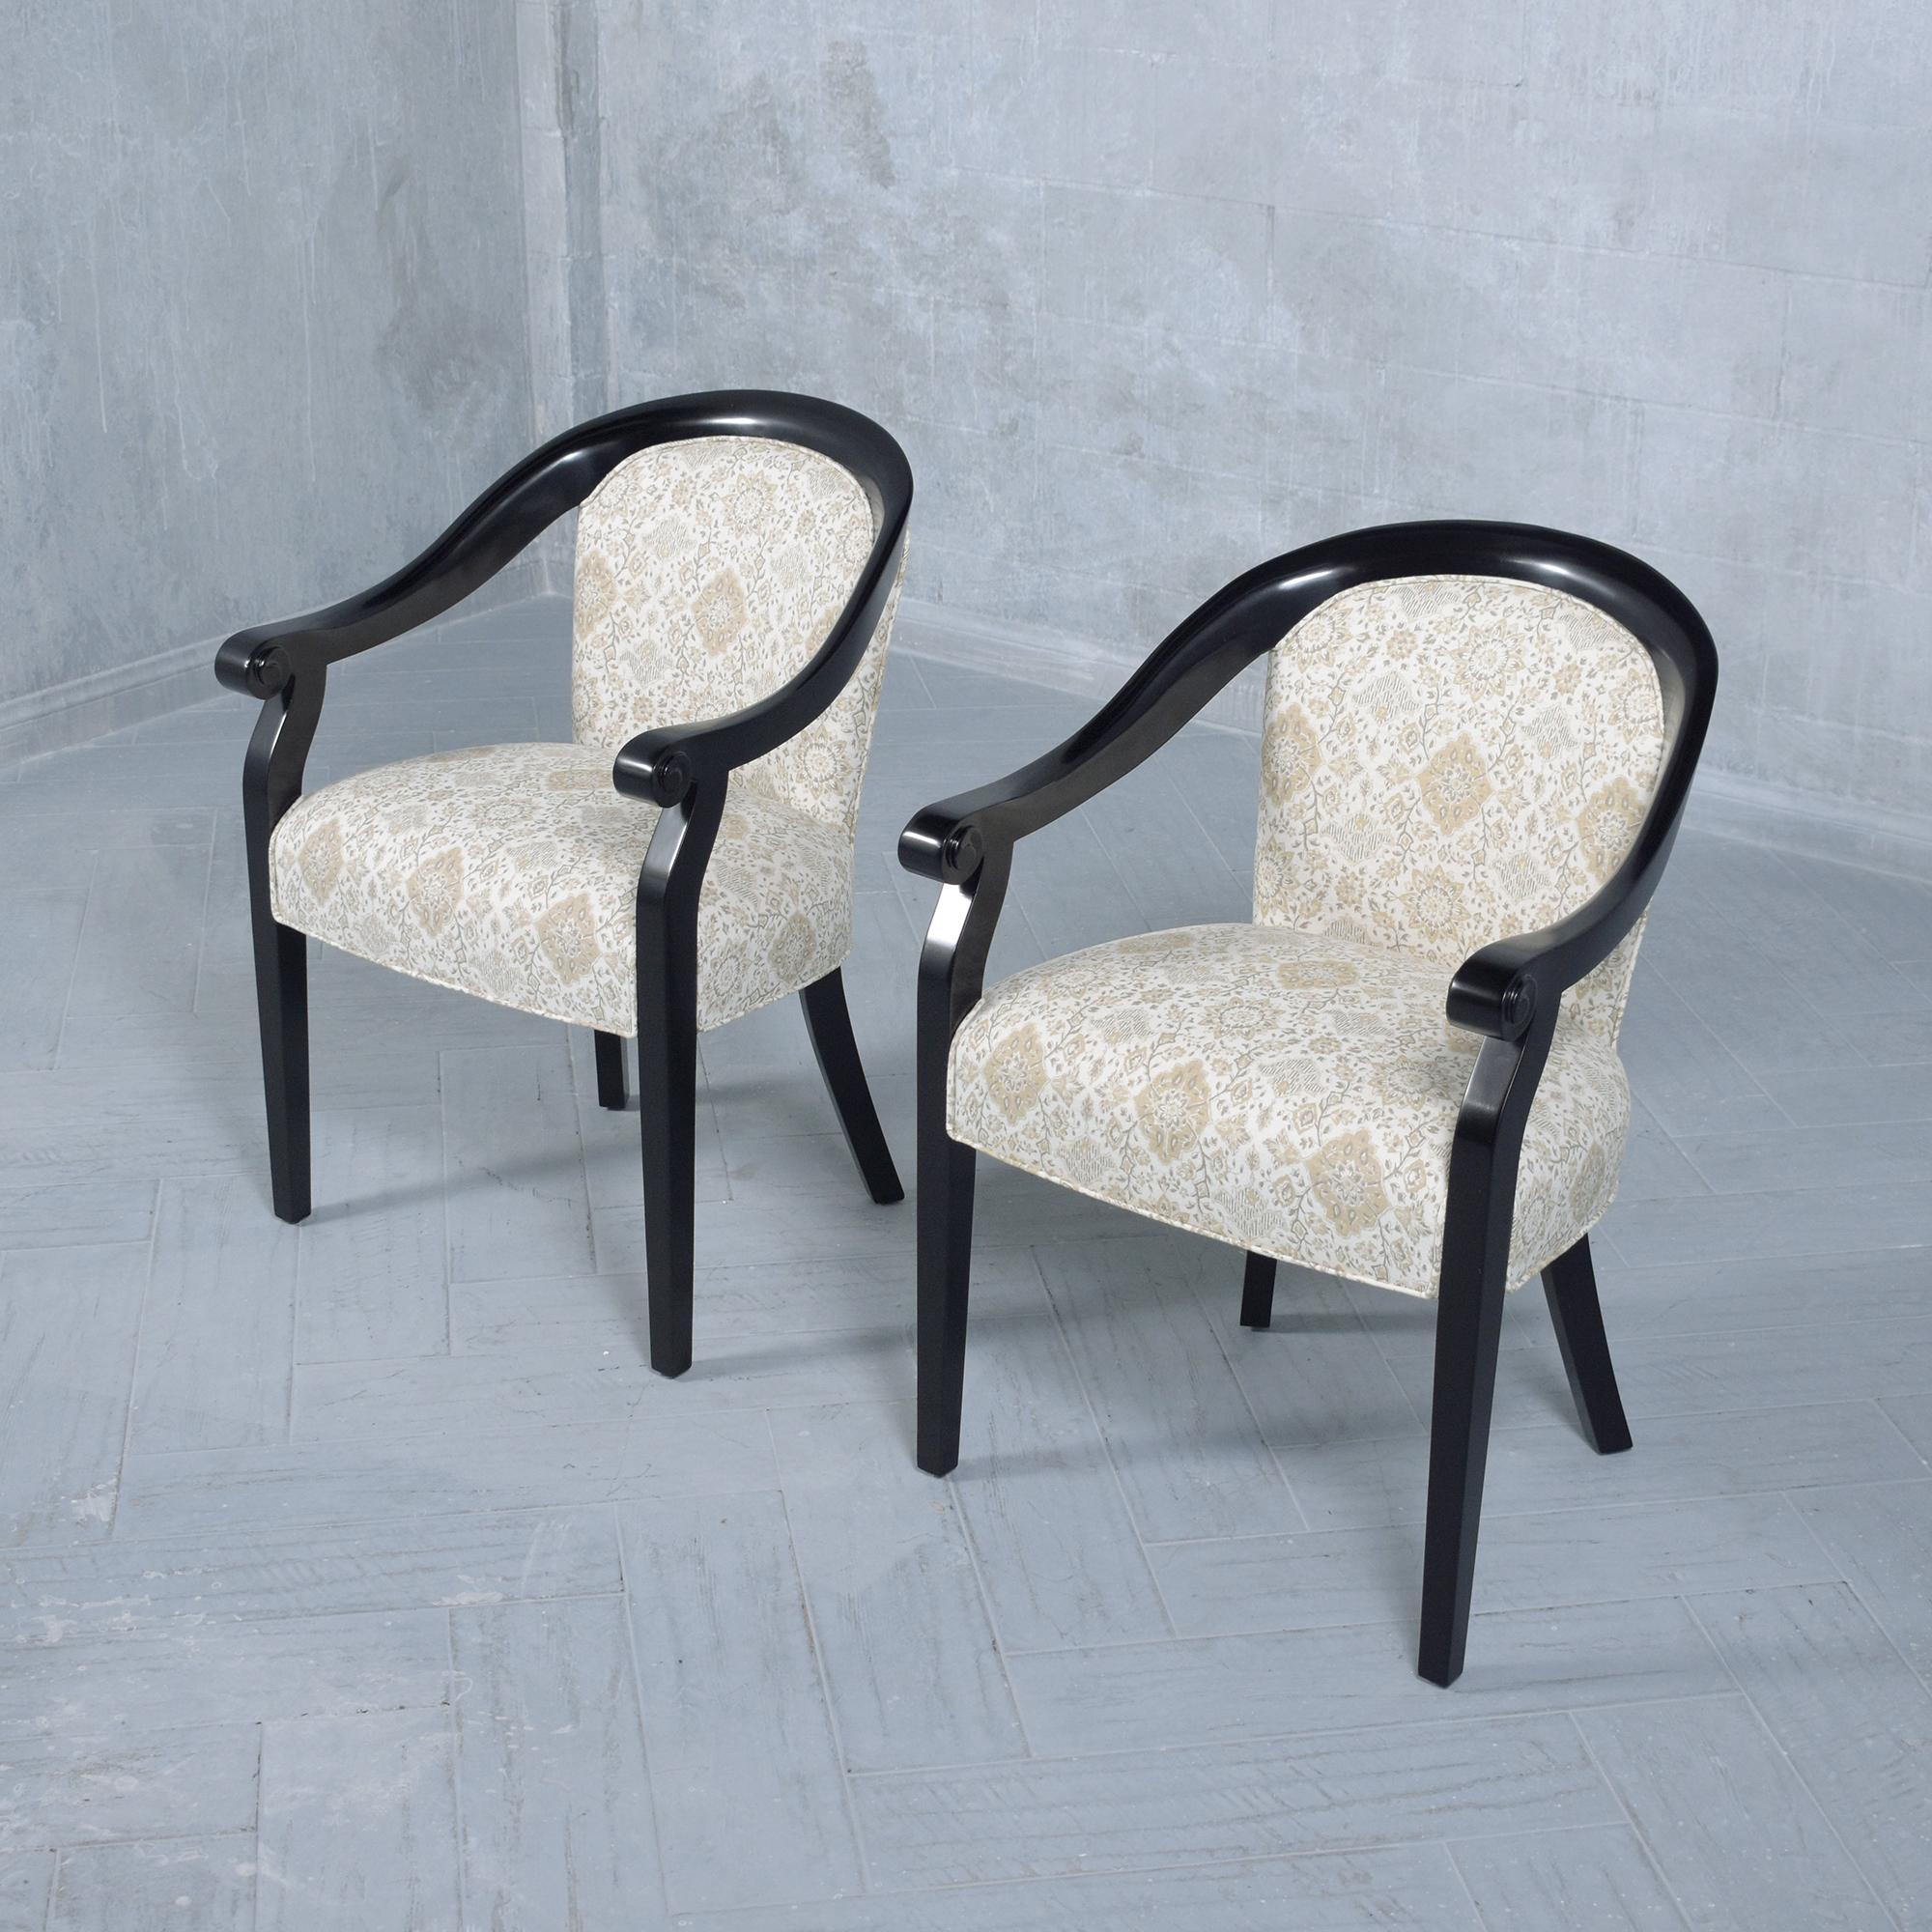 Immerse yourself in the timeless elegance of the 1960s with our pair of Hickory Modern Armchairs, beautifully restored to embody the luxury and style of mid-century design. These armchairs have been expertly stained in a deep black hue, enriched